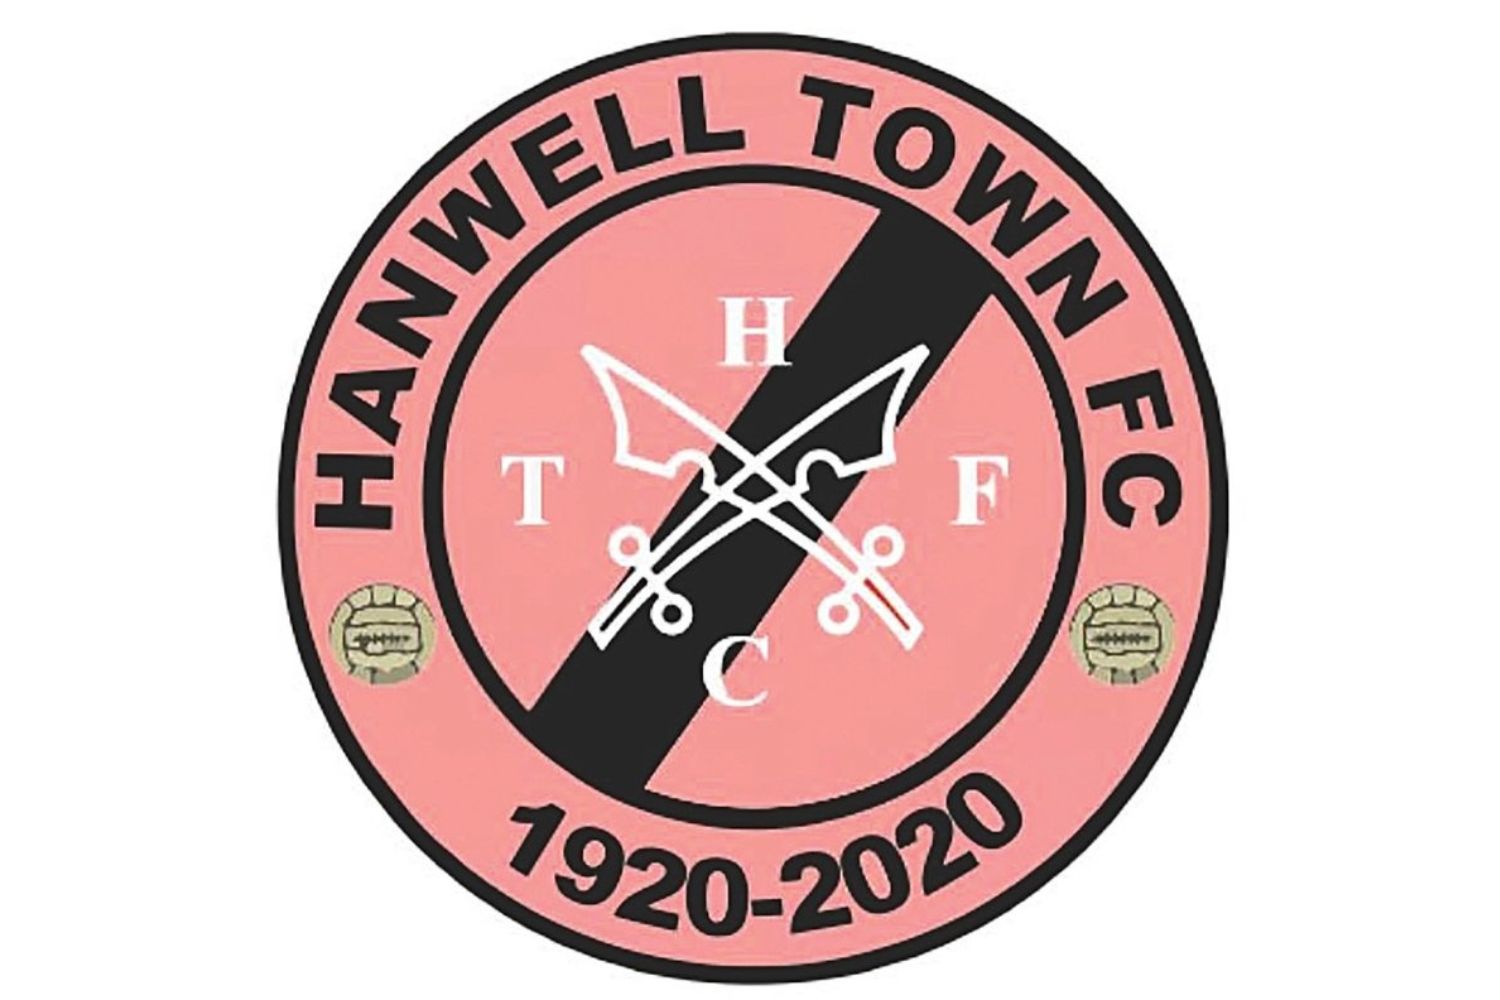 hanwell-town-fc-11-football-club-facts